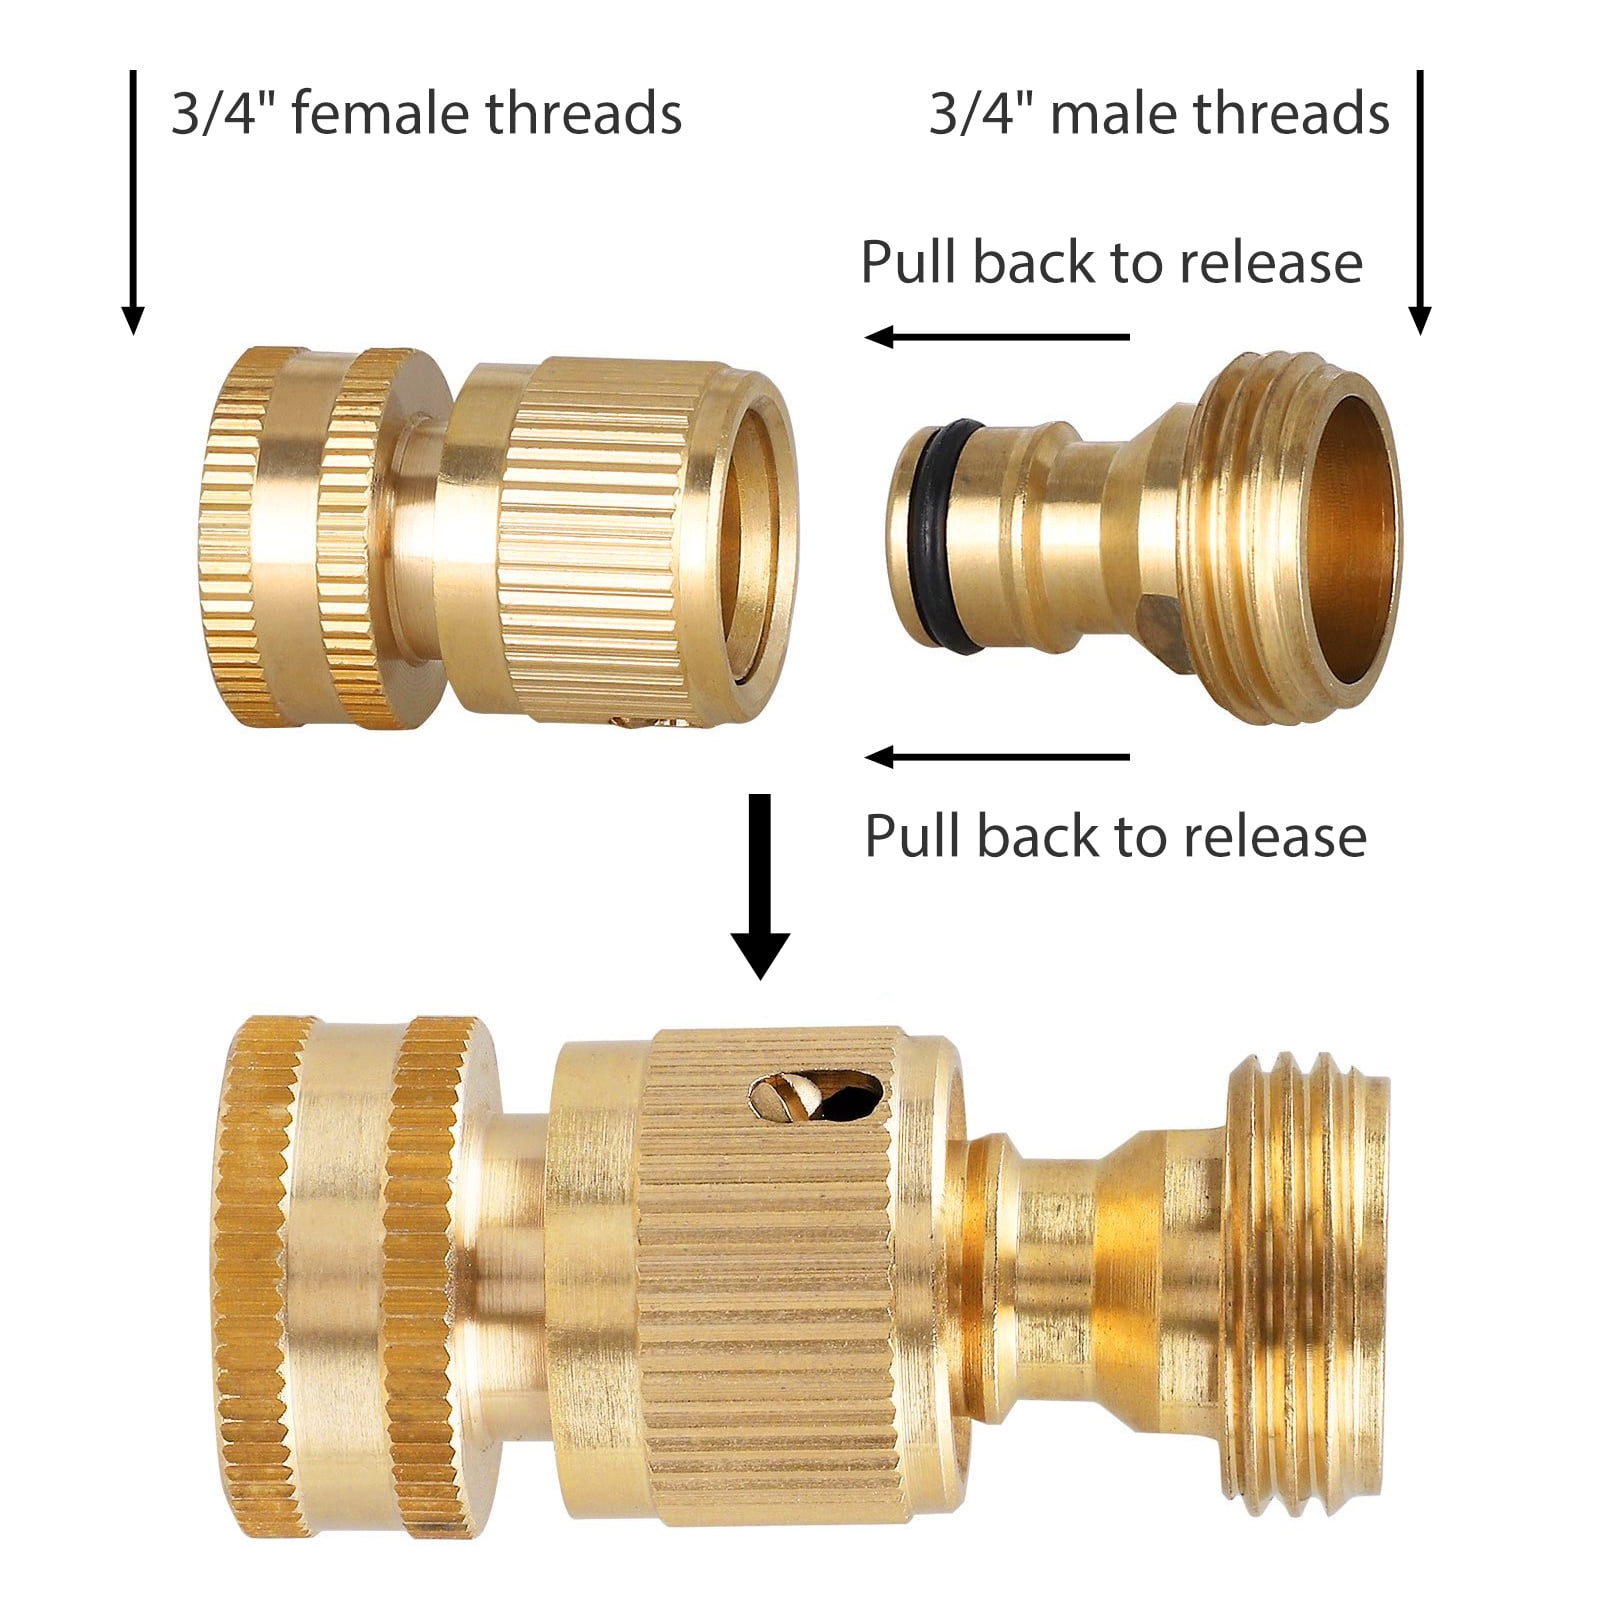 BoArt 2 Sets Garden Hose Quick Connector Set Solid Brass 3/4 Inch Water Fitings Thread Easy Connect No-Leak Male Female 